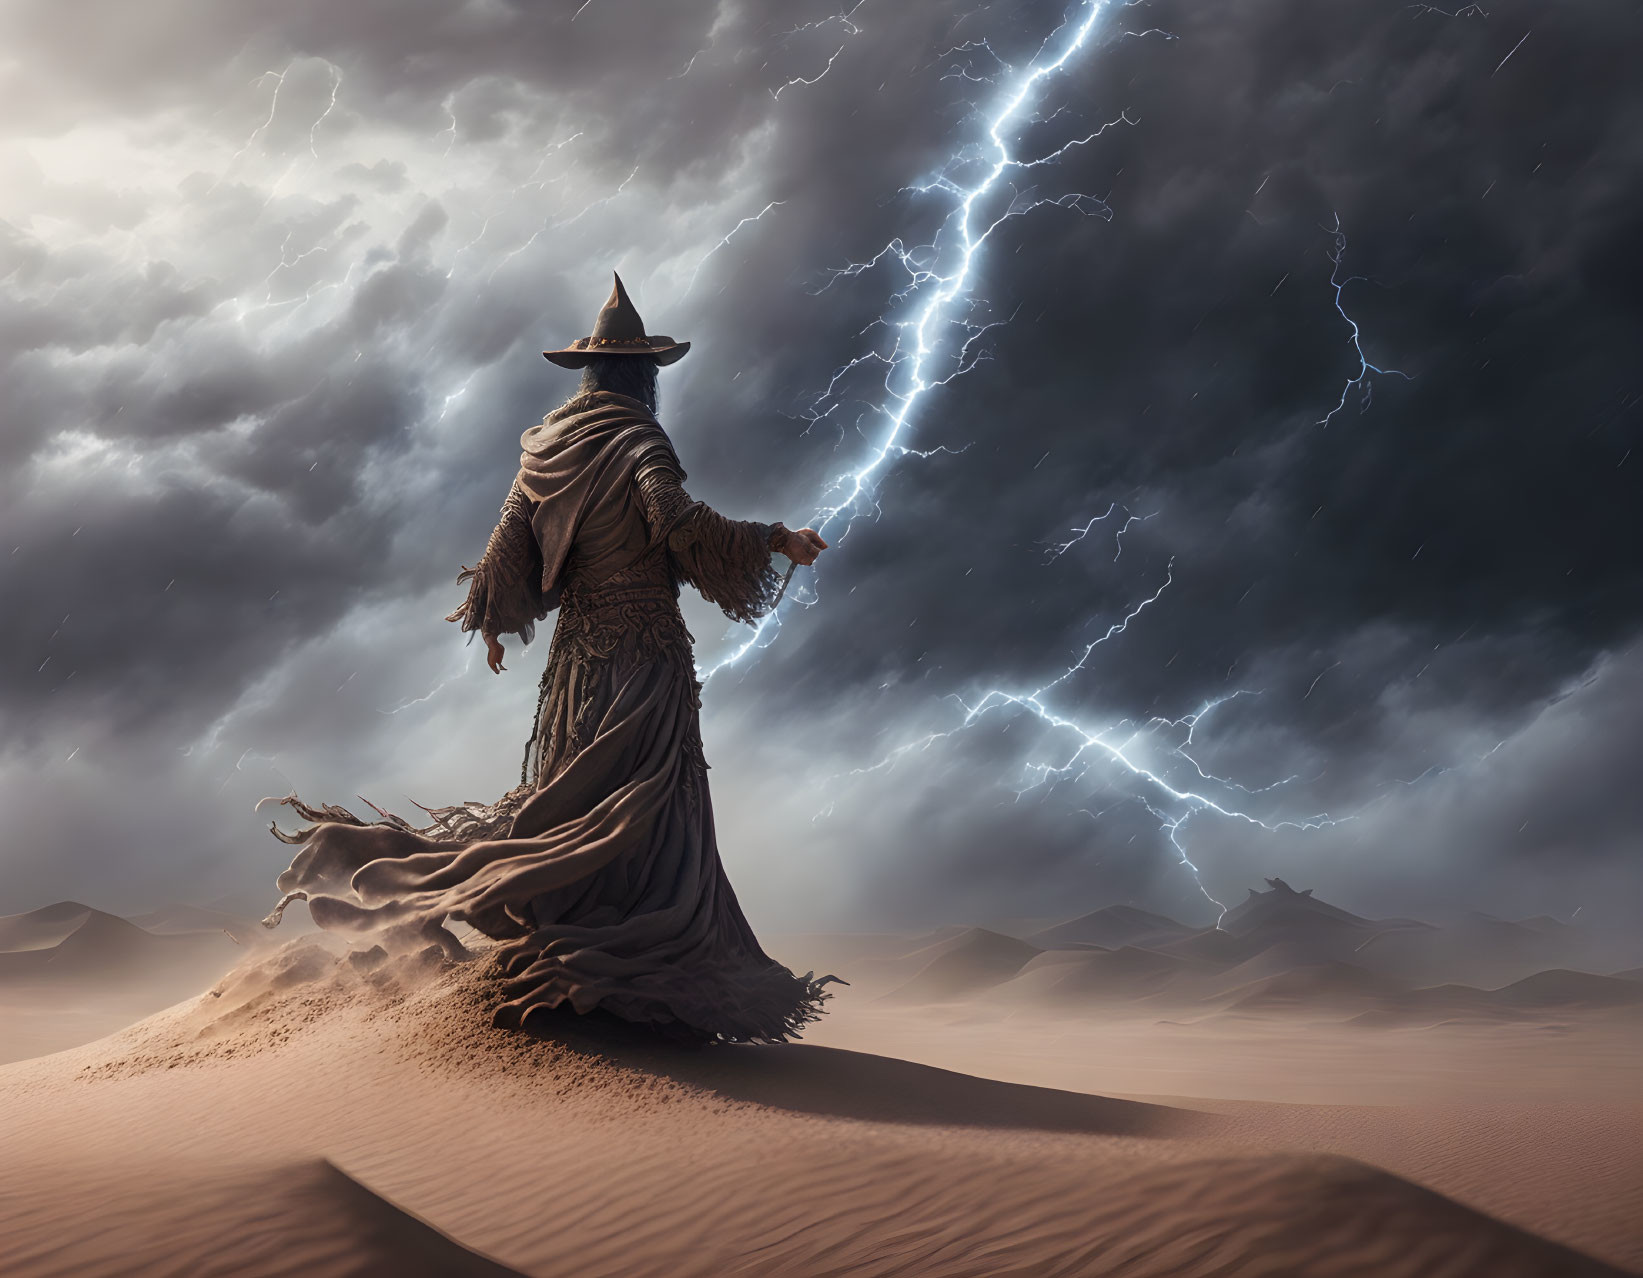 Wizard in robe with staff on desert dune under stormy sky